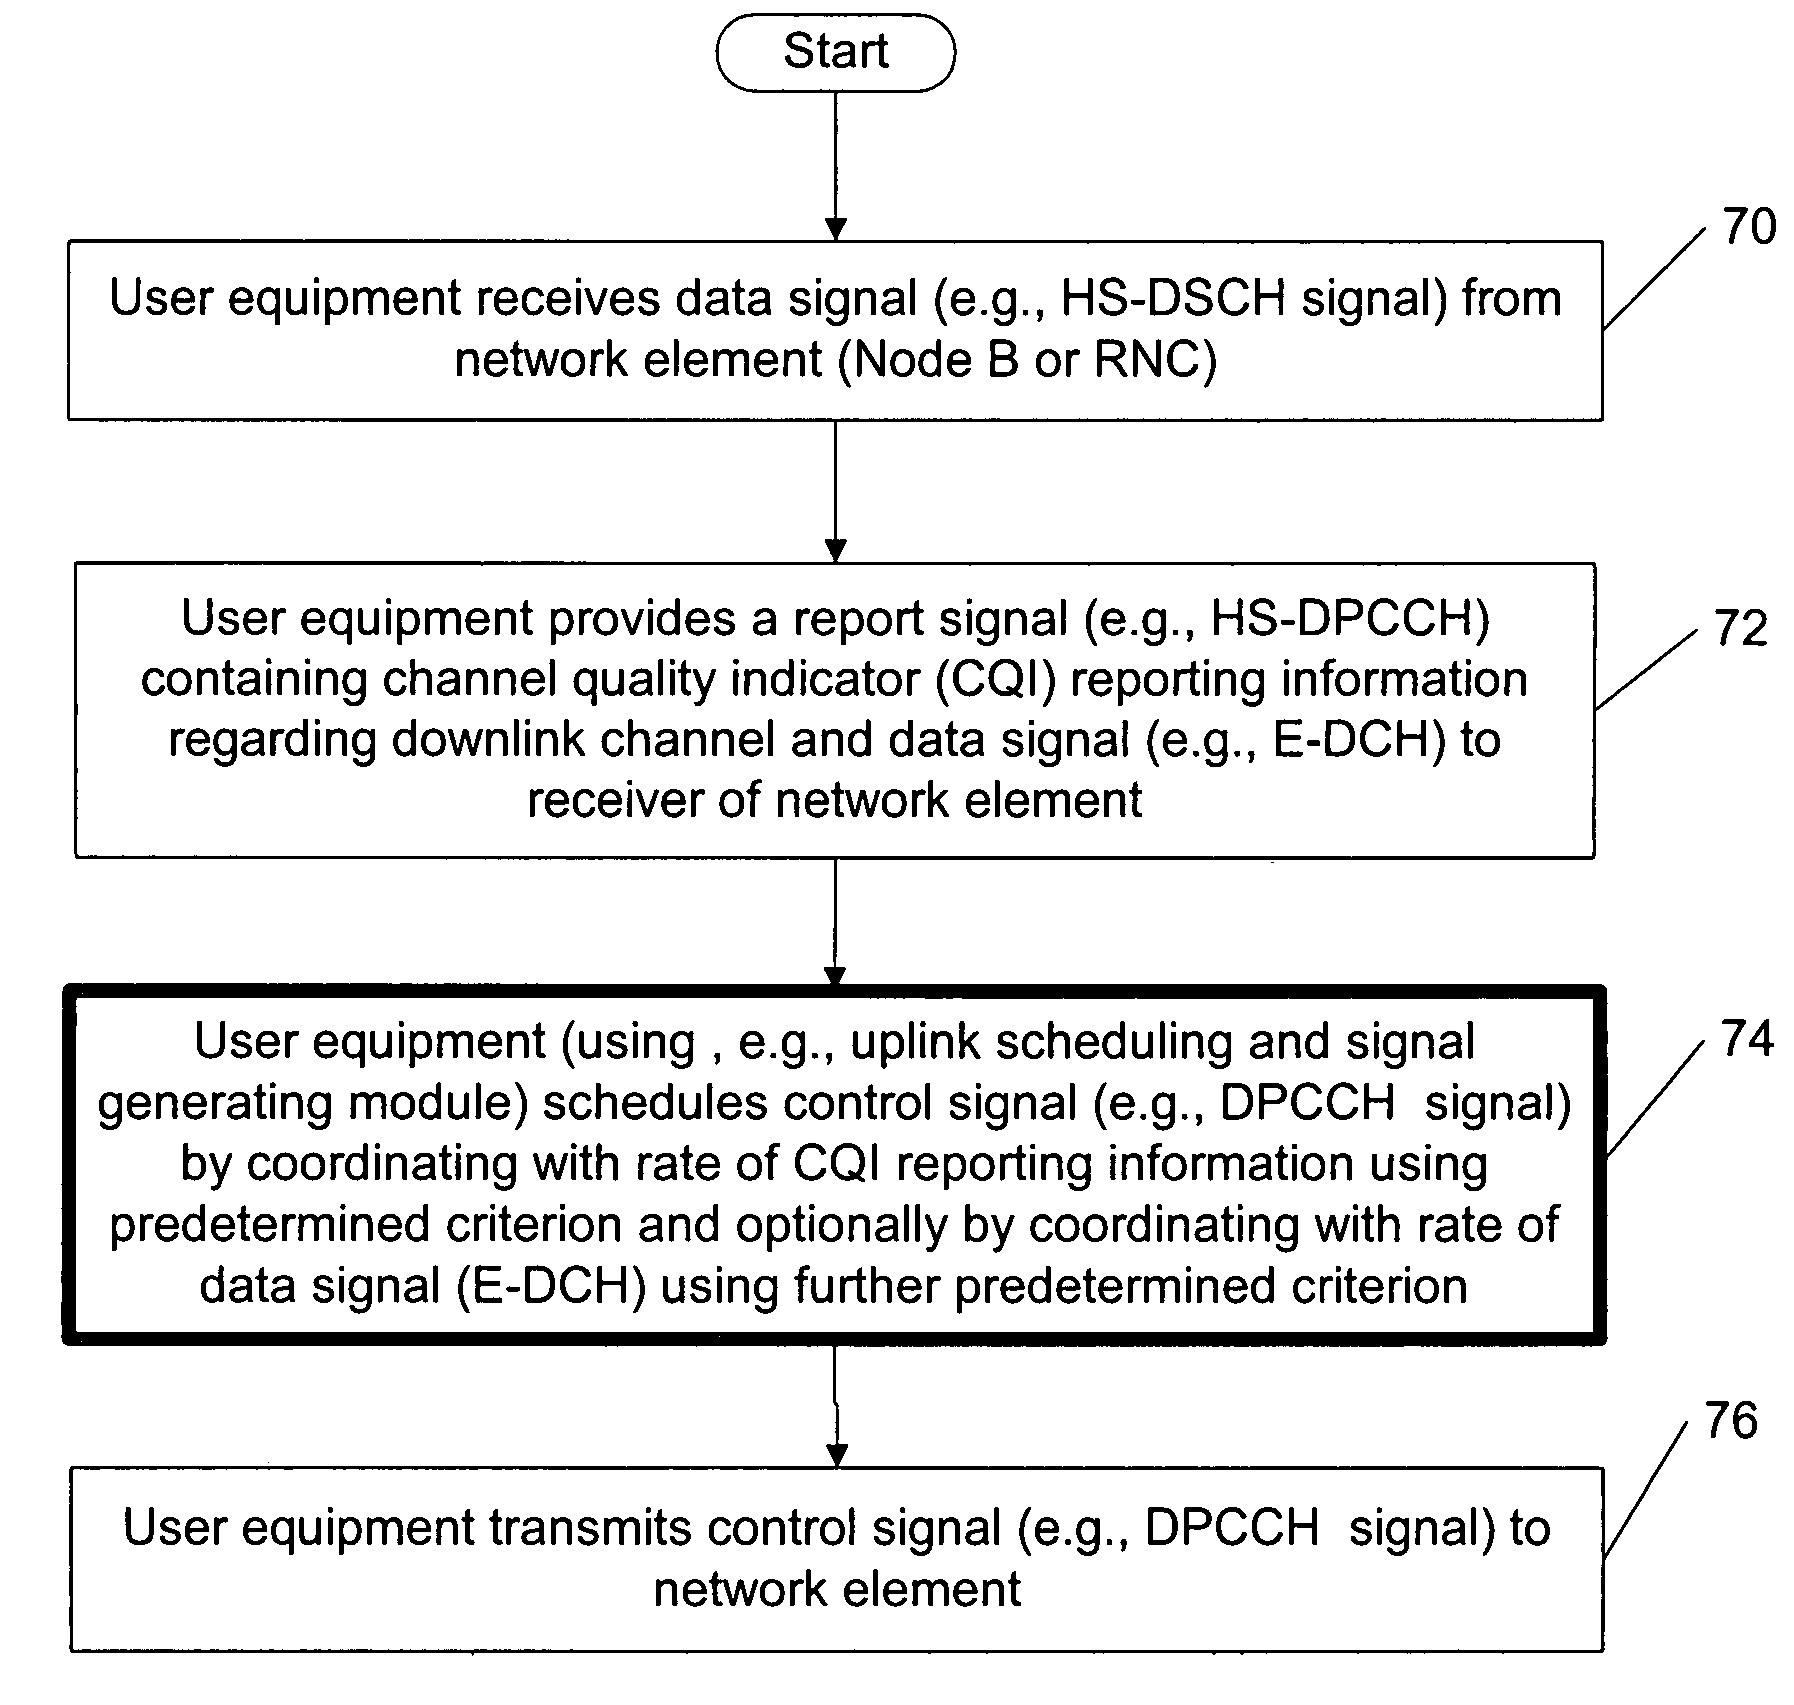 Coordinating uplink control channel gating with channel quality indicator reporting